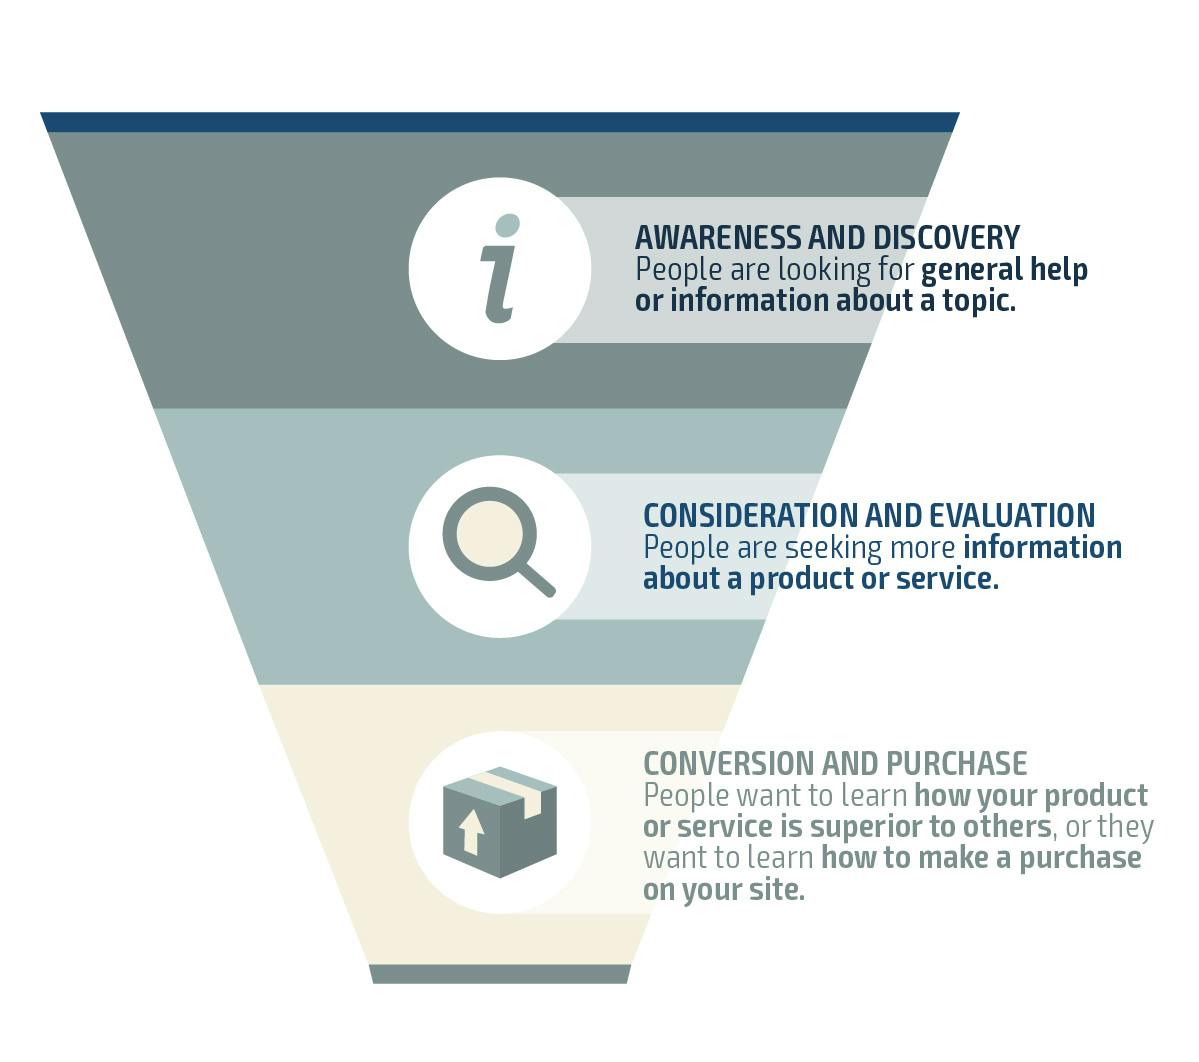 how to build a sales funnel